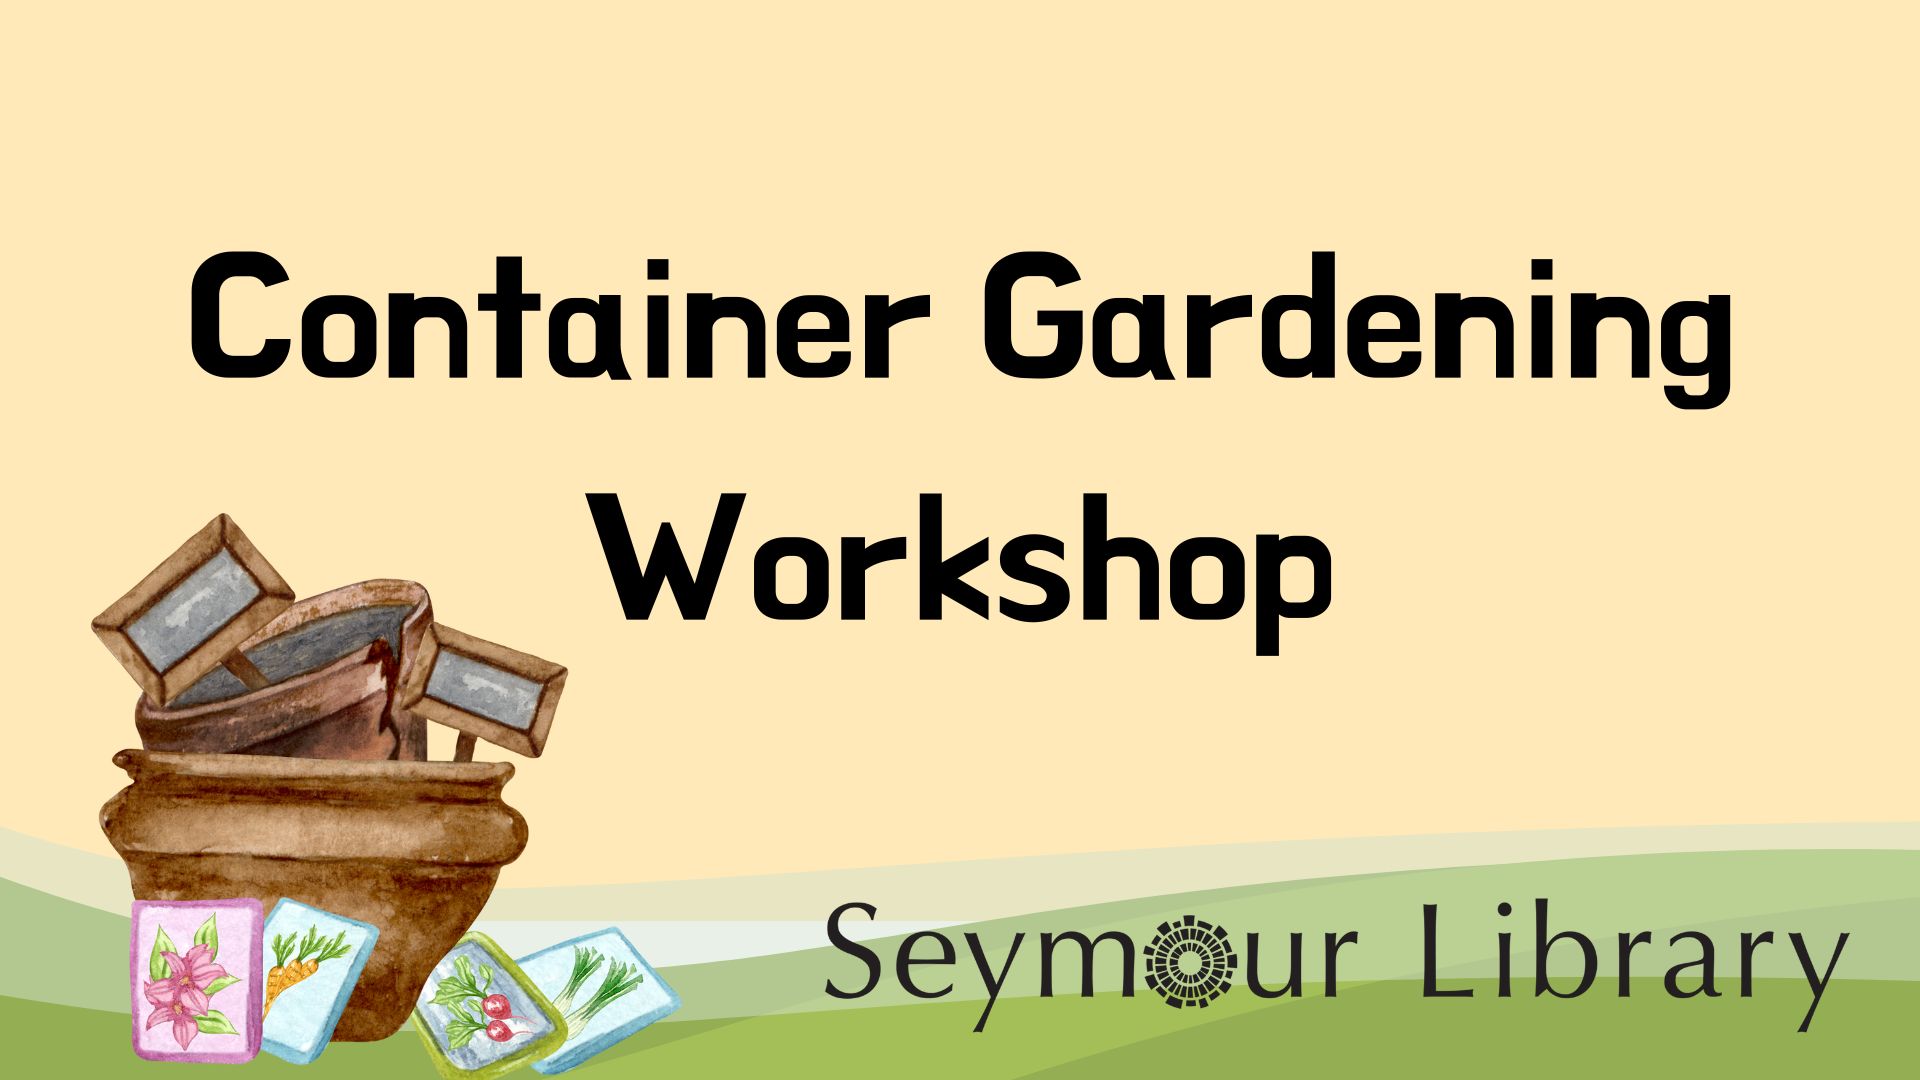 Container Gardening Workshop - Seymour Library. Graphie with pots for seeds and planting.